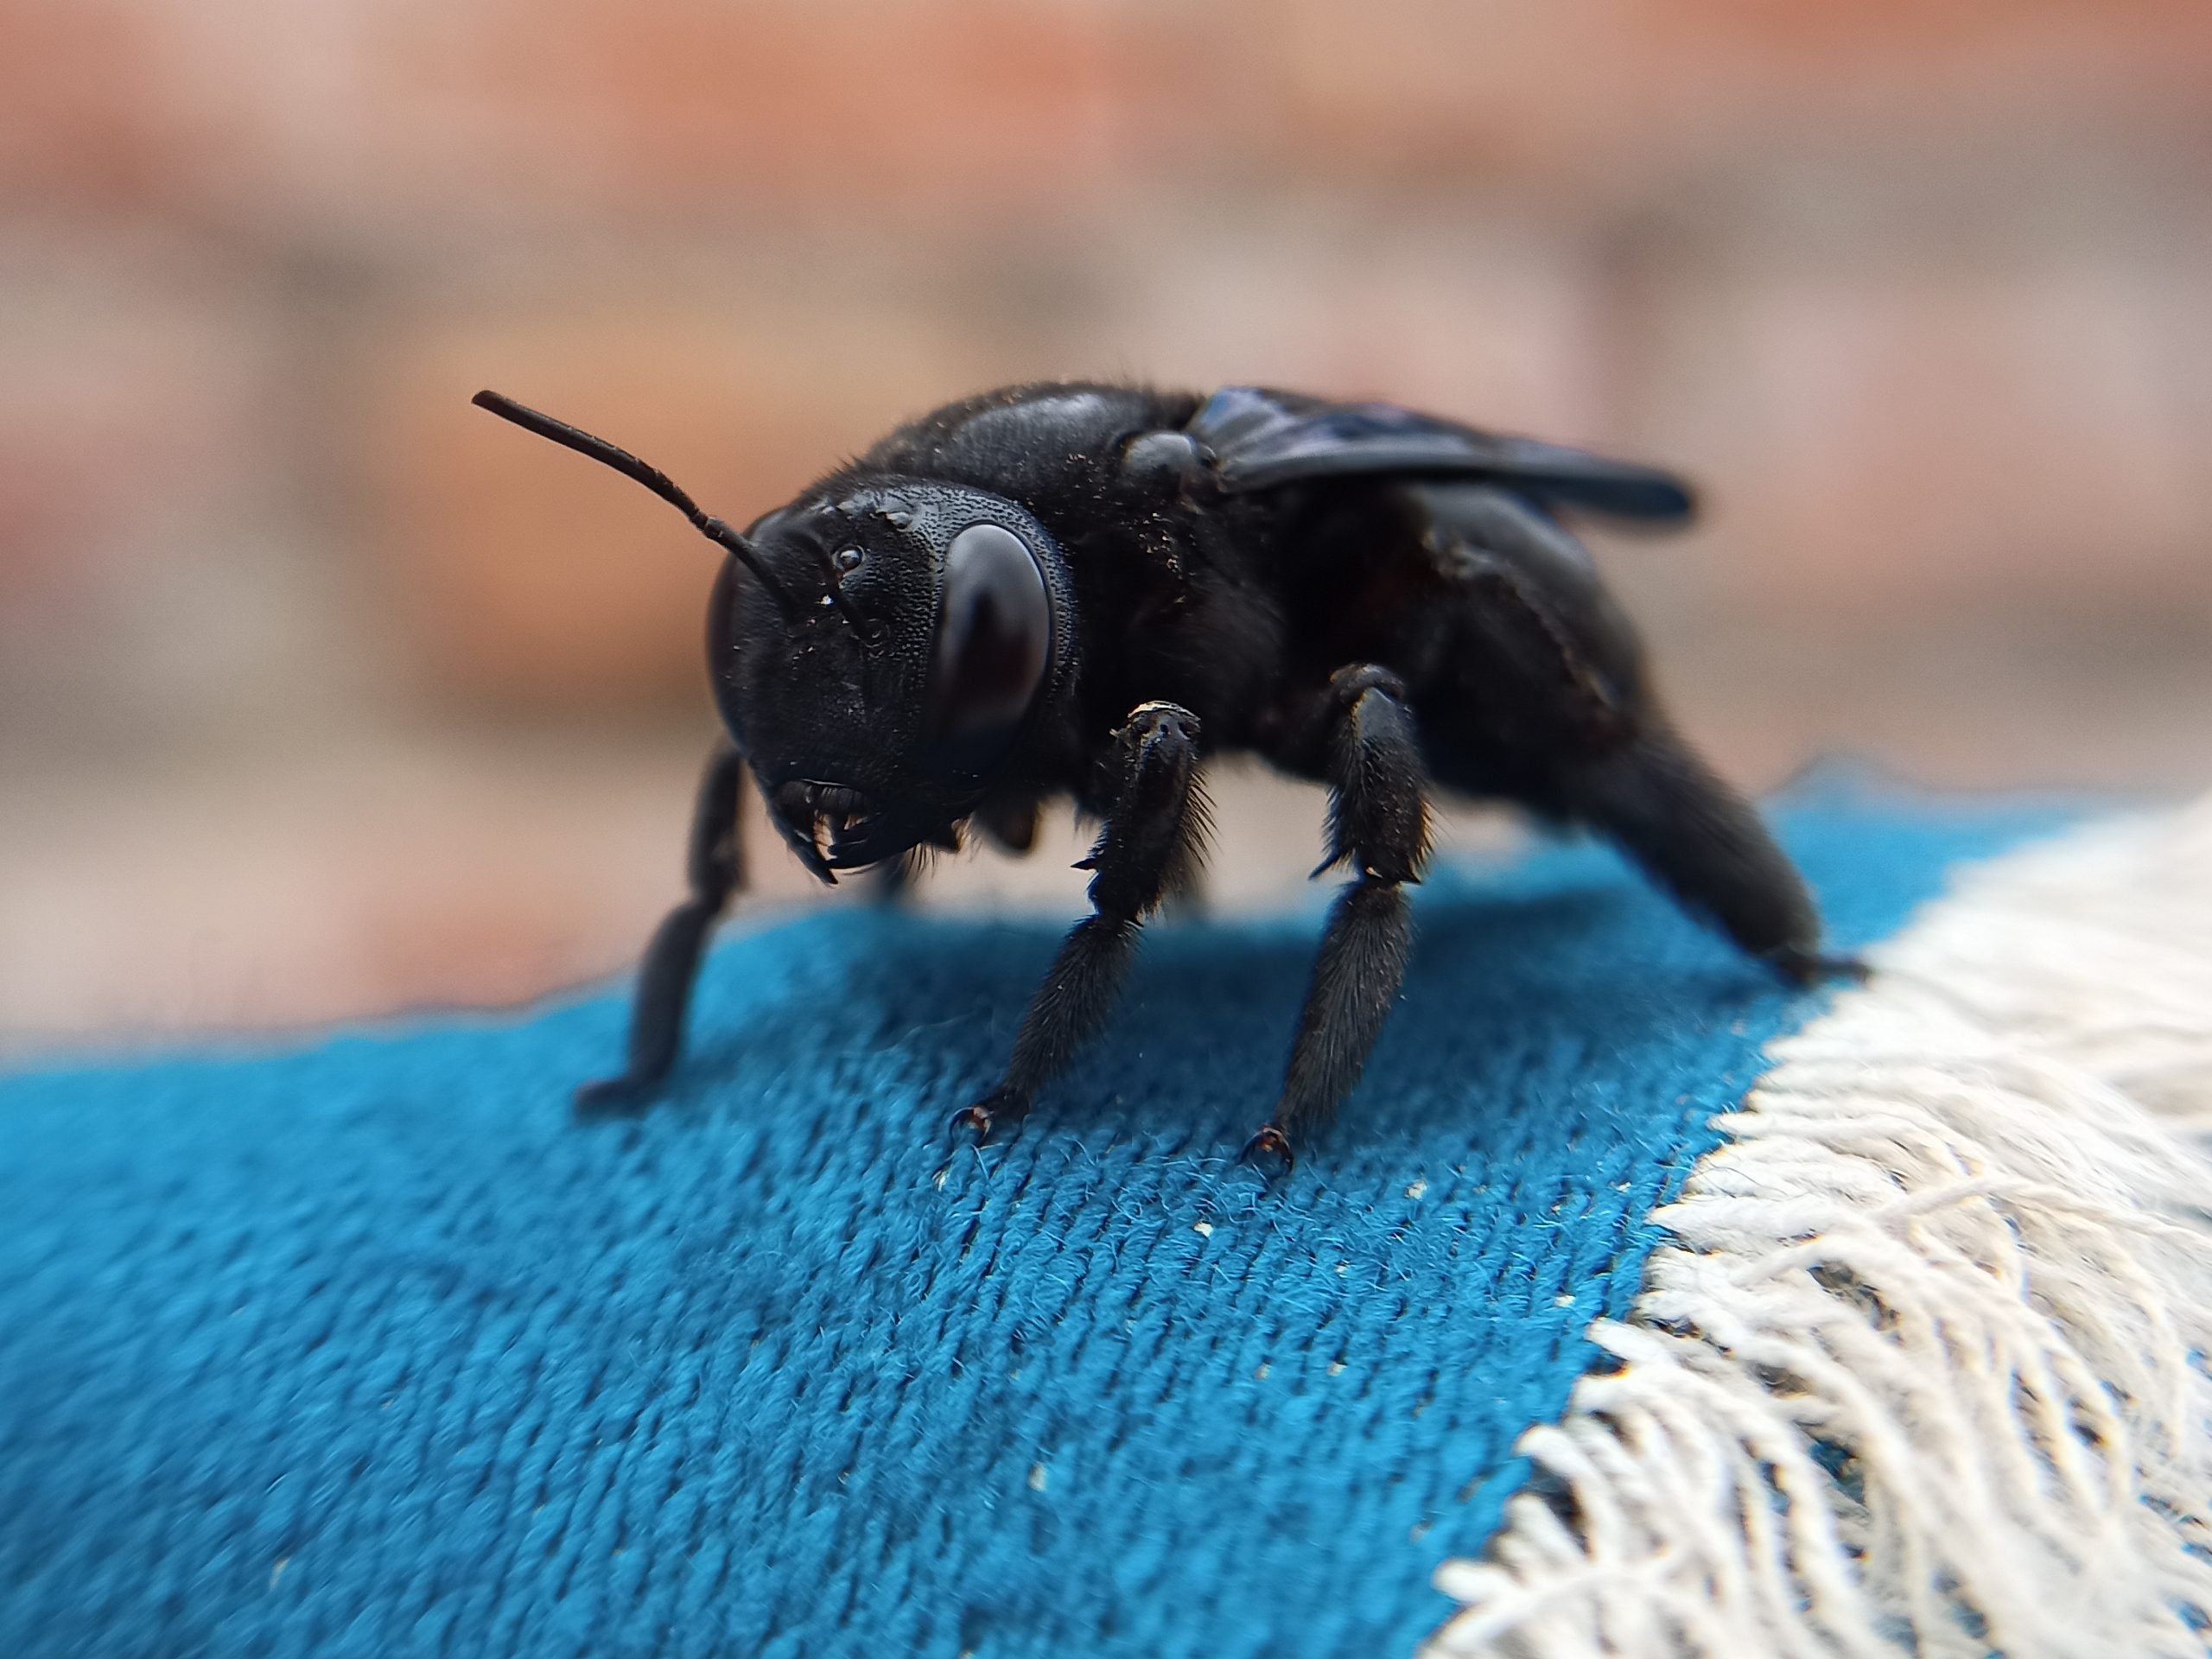 Carpenter bee sitting on a piece of a cloth